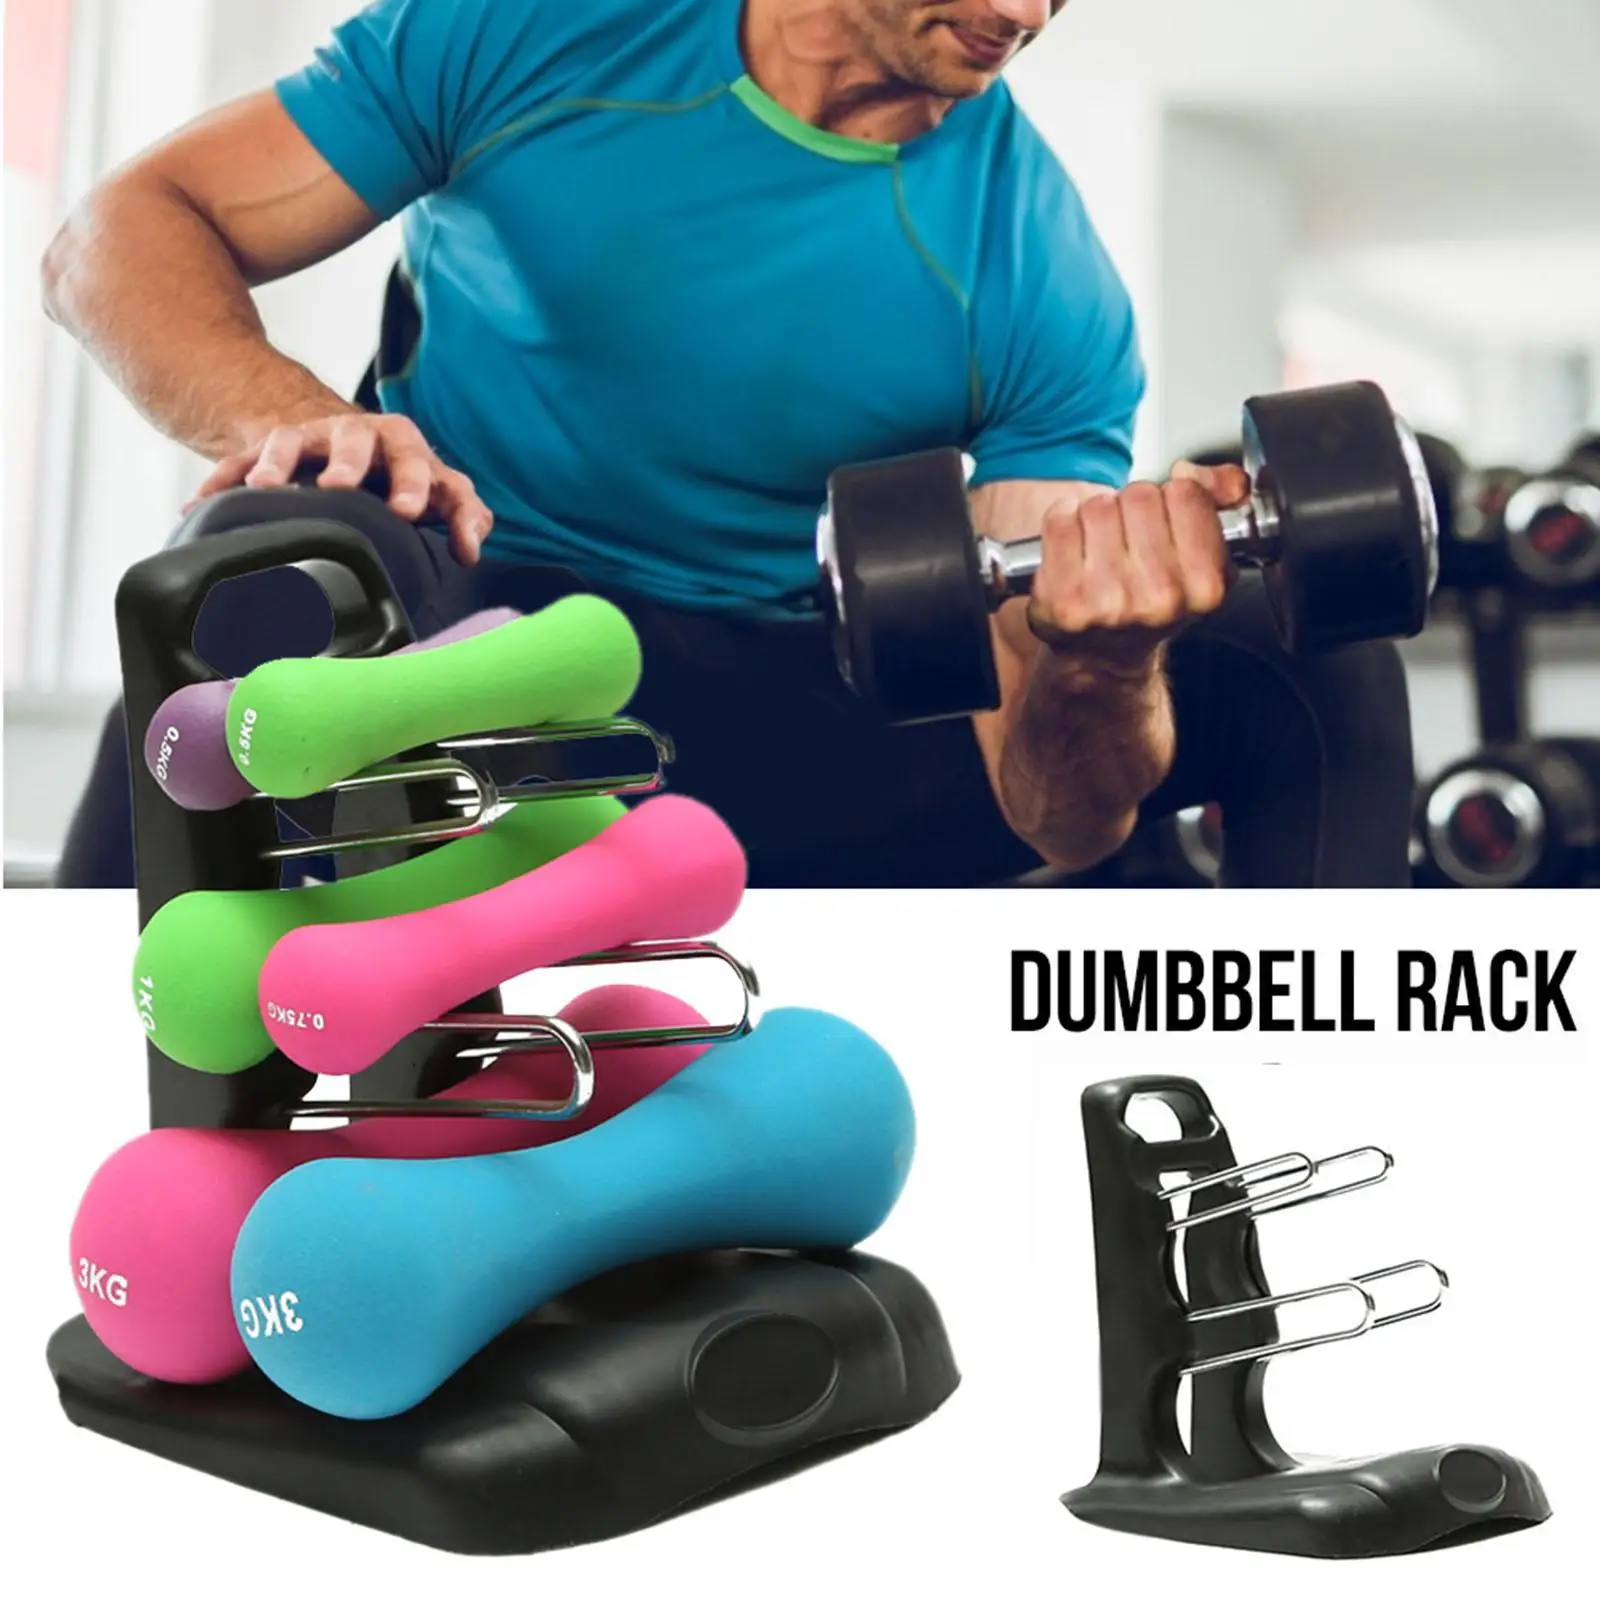 3 Tier Dumbbell Rack Stand Only Storage Rack Organizer Home Gym Exercise